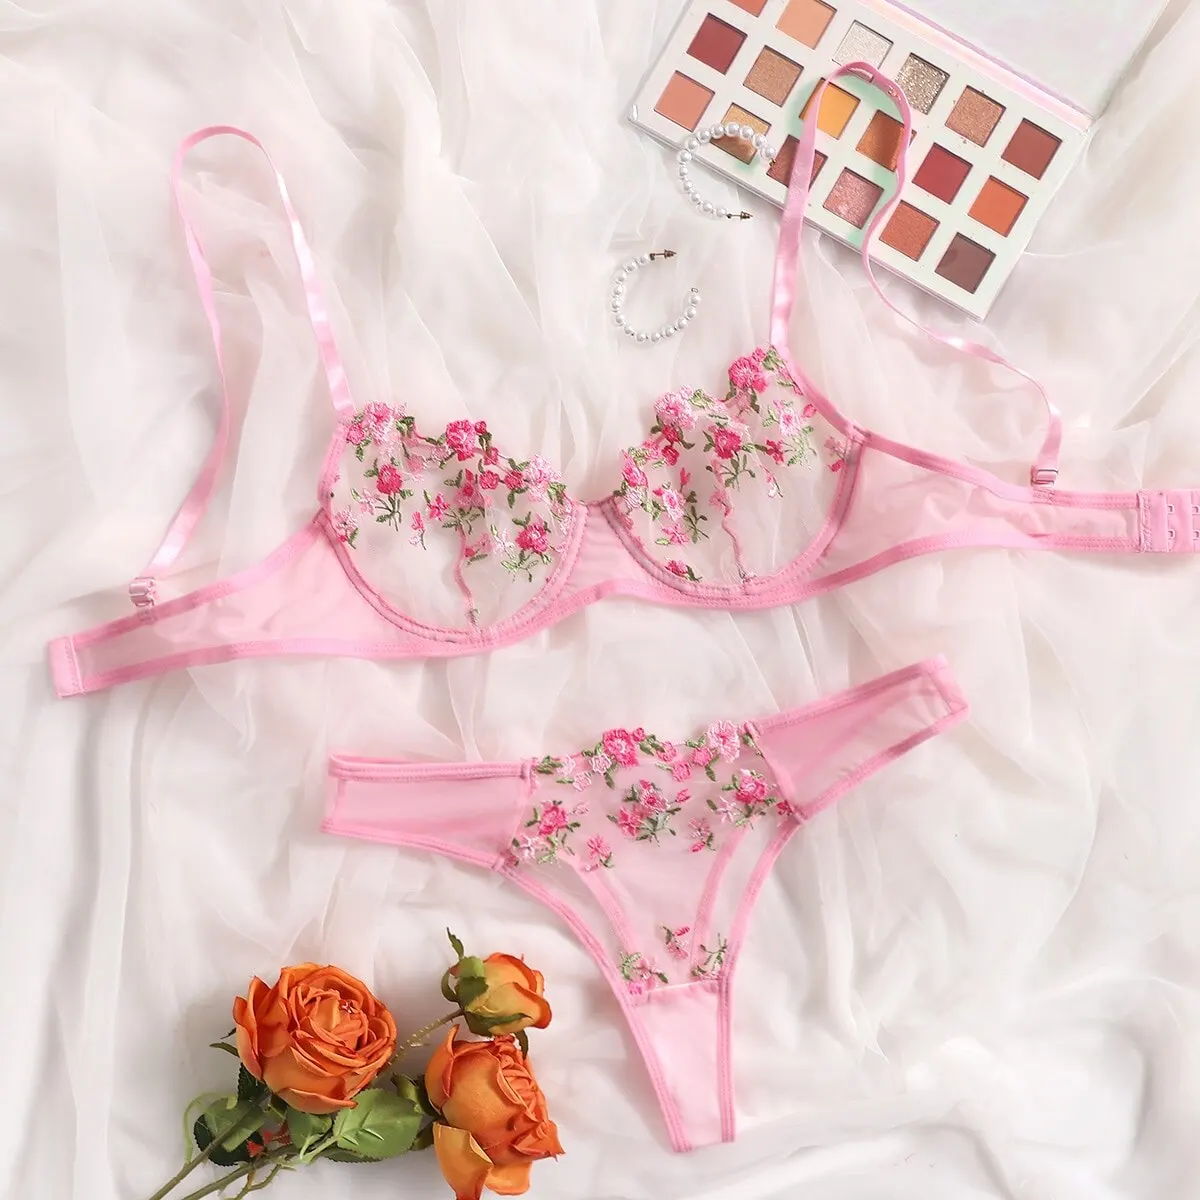 Fairy Floral Lingerie Set With Delicate Underwear, Transparent Sexy Bra And  Panty, Seamless Design, Luxury Embroidery Lace, And Desire Hot Girl From  Jacky0817, $14.5